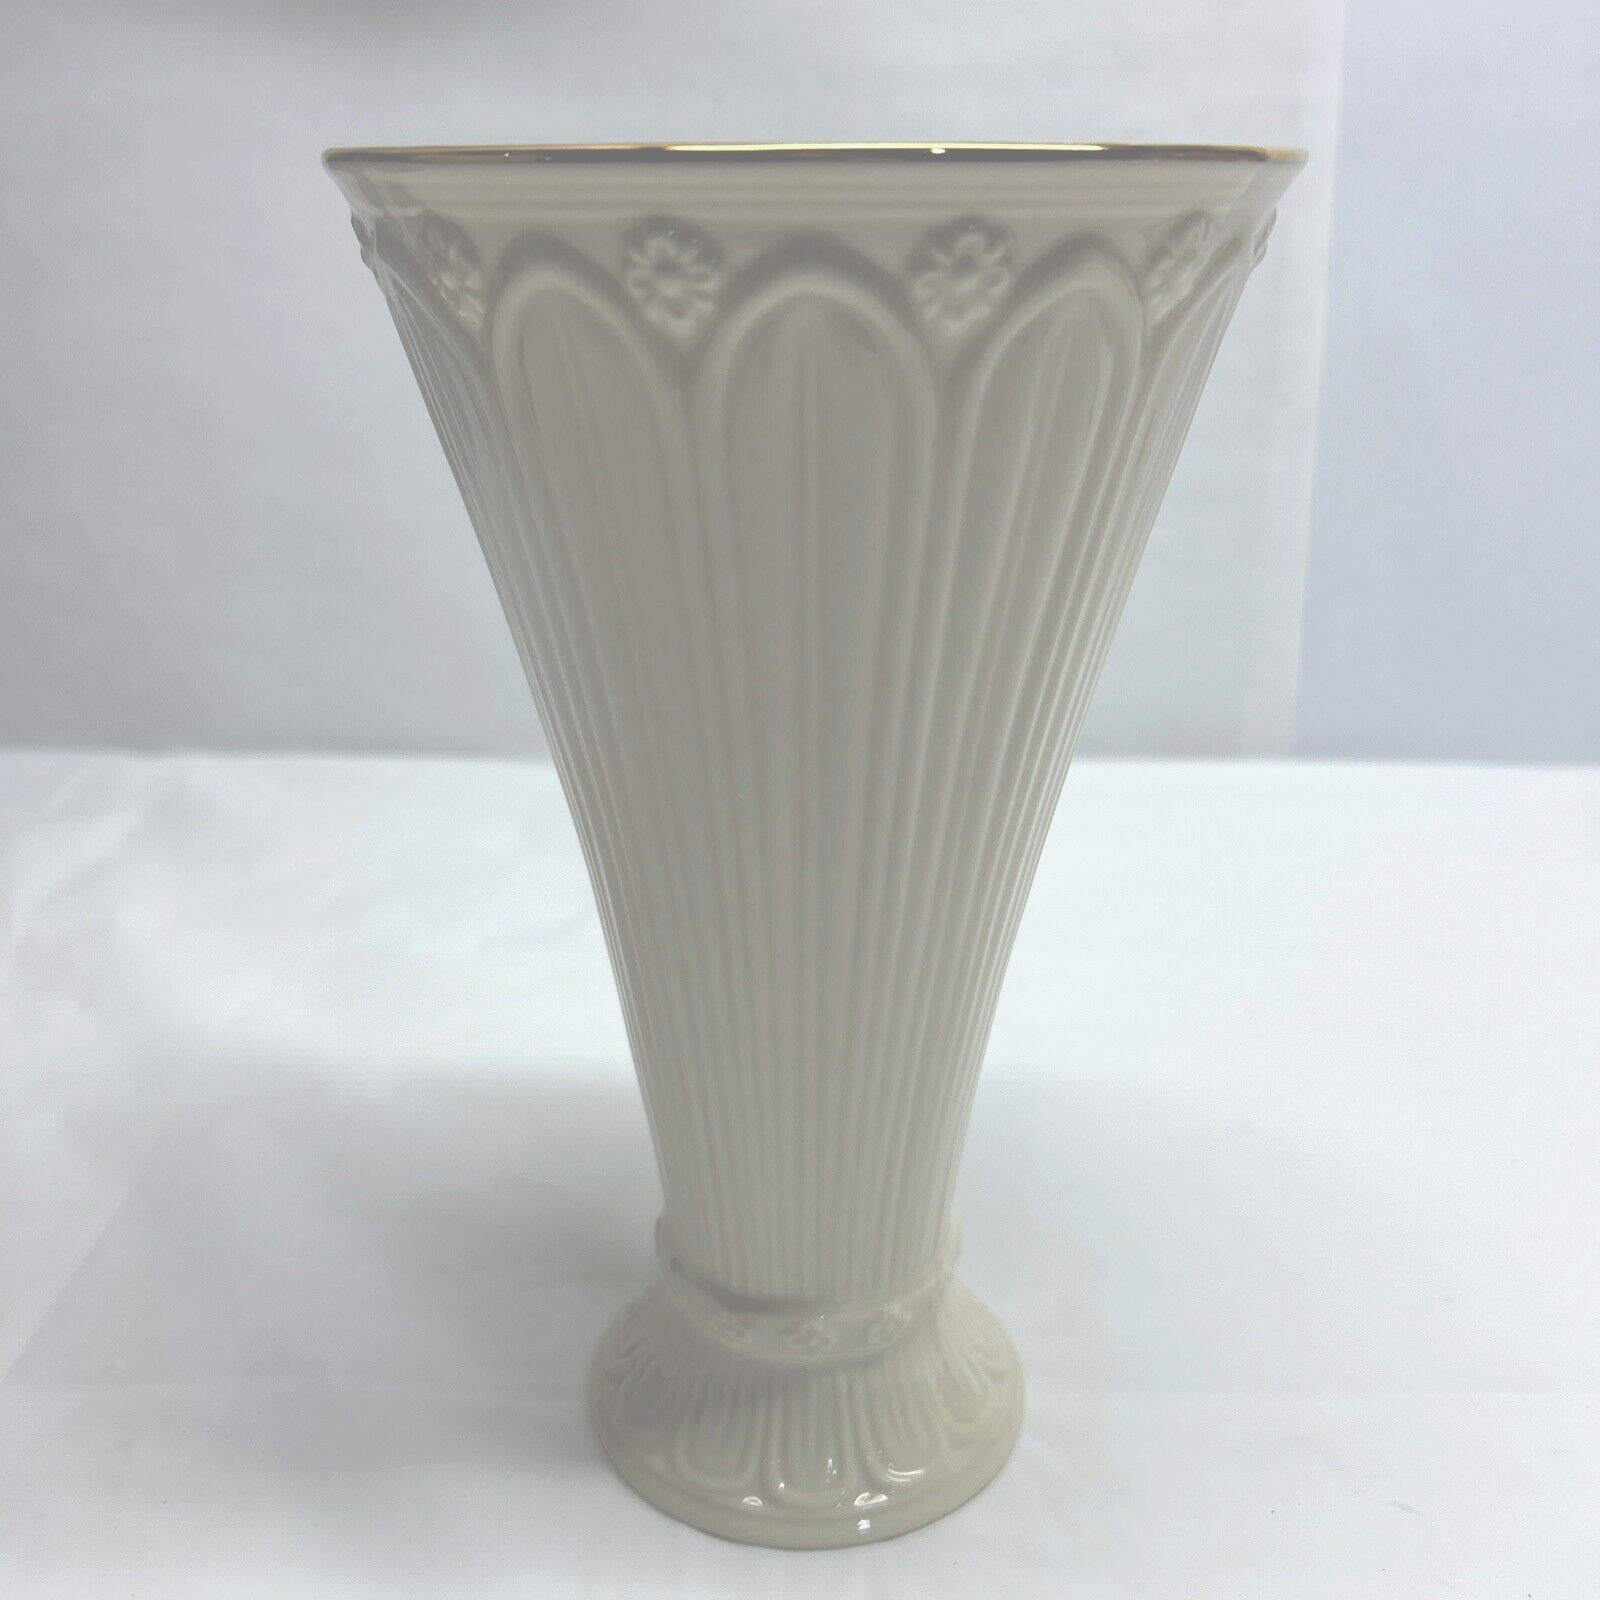 Lenox Porcelain Vase with 24K Gold Trim - 9 inches tall